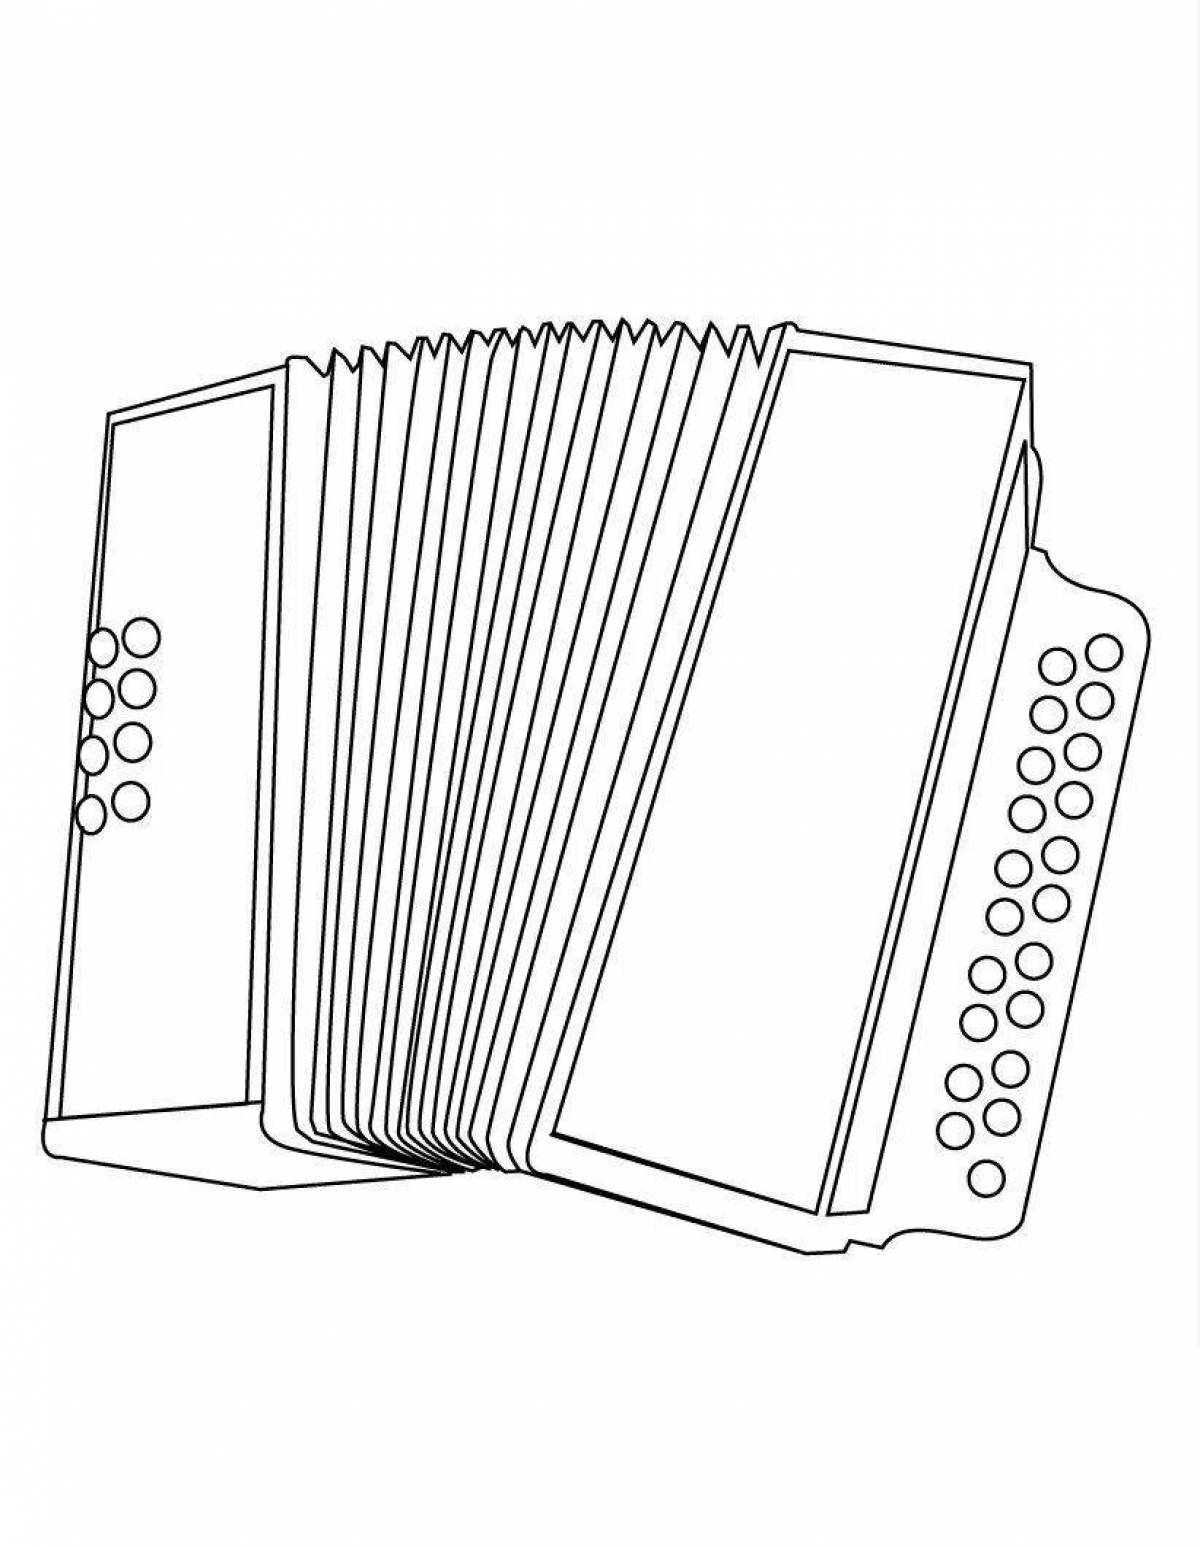 Joyful accordion coloring book for toddlers